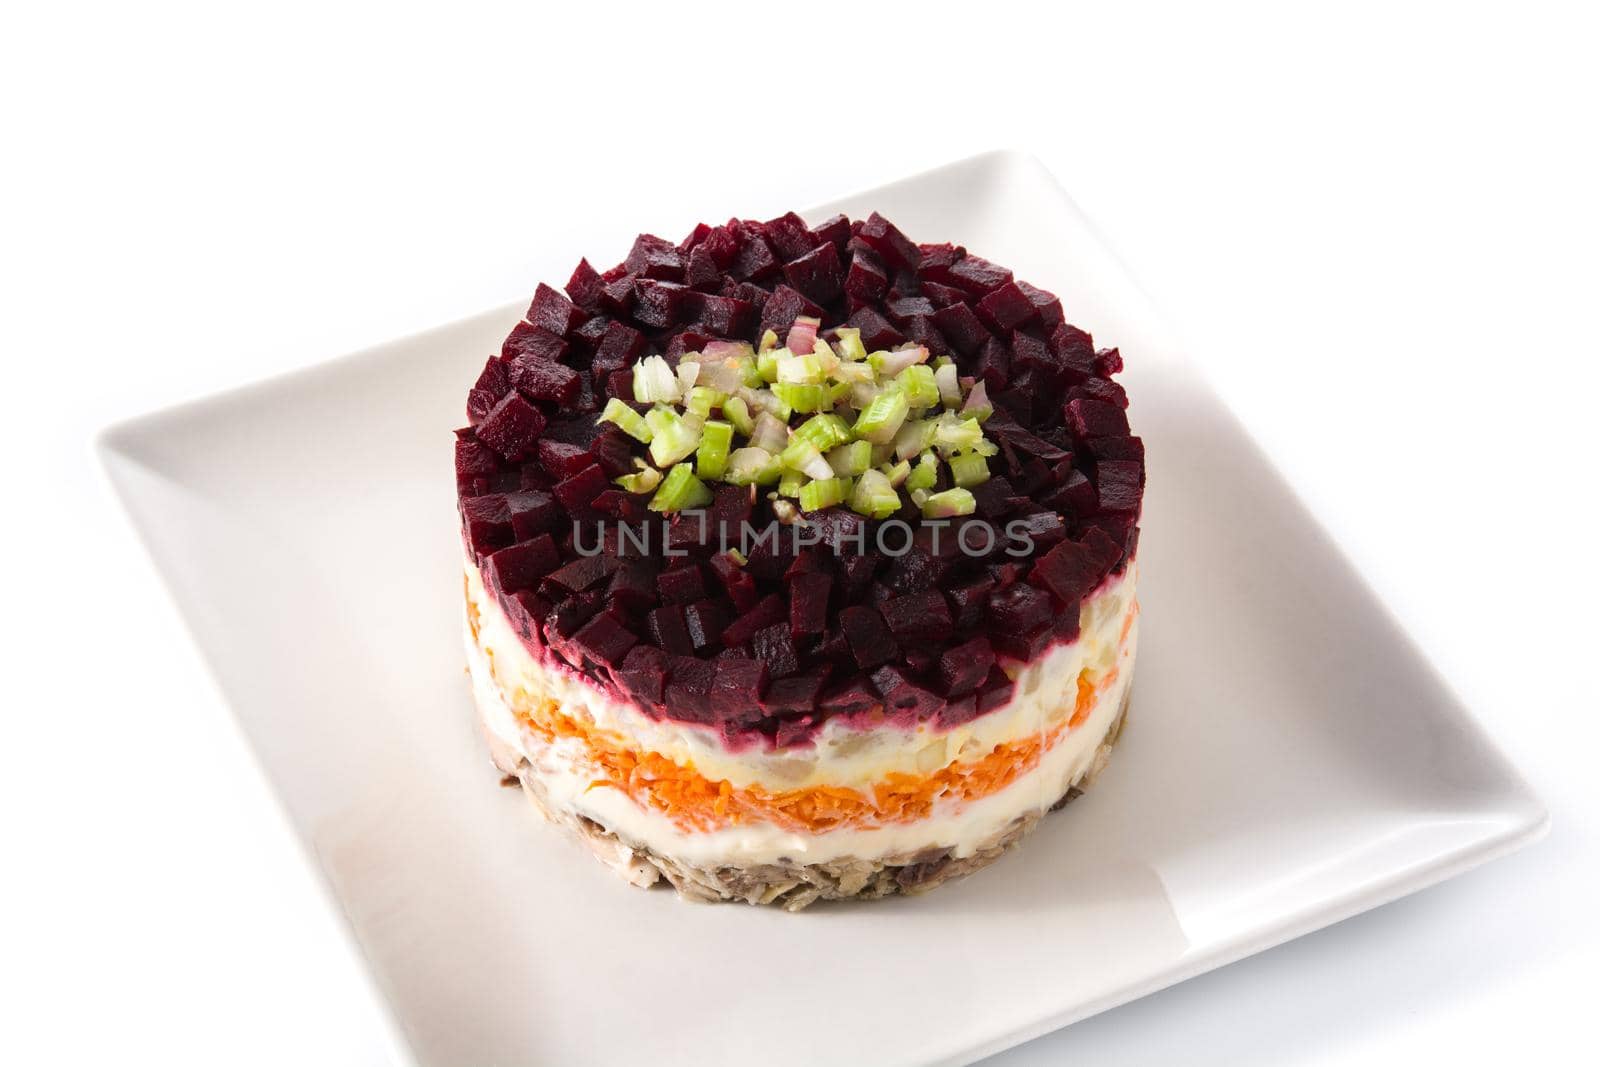 Traditional Russian herring salad with beetroot and carrots isolated on white background.